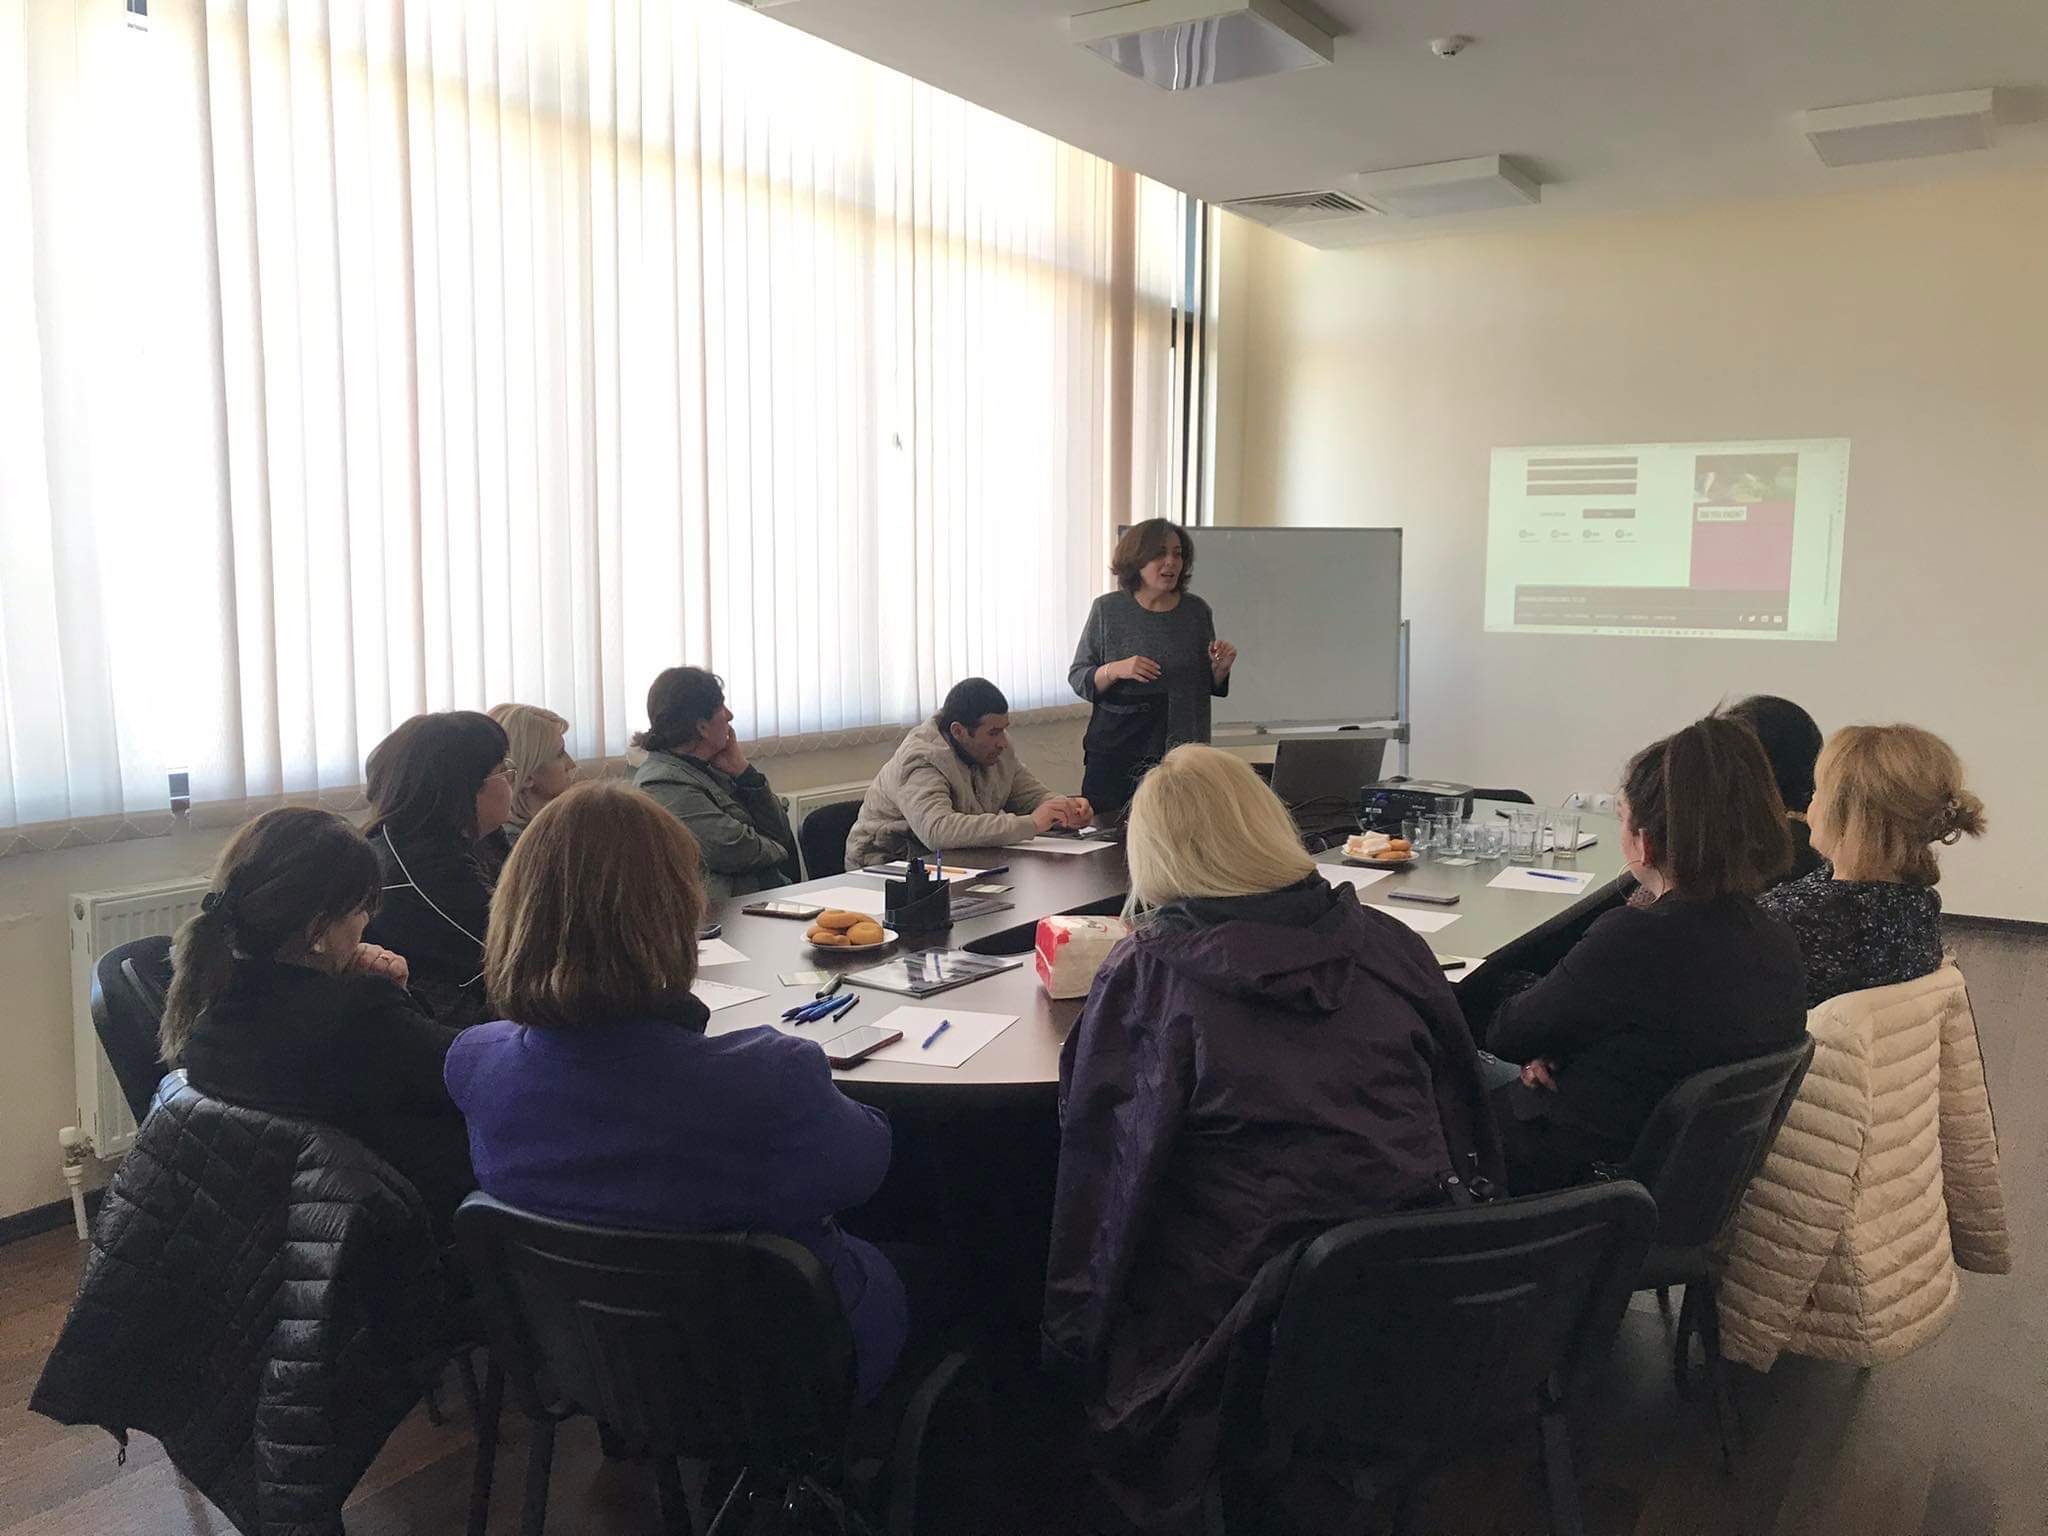 With the Support of CENN & US Embassy Teachers are Engaged in Training Sessions on Civic Engagement, Participation & Education for Sustainable Development